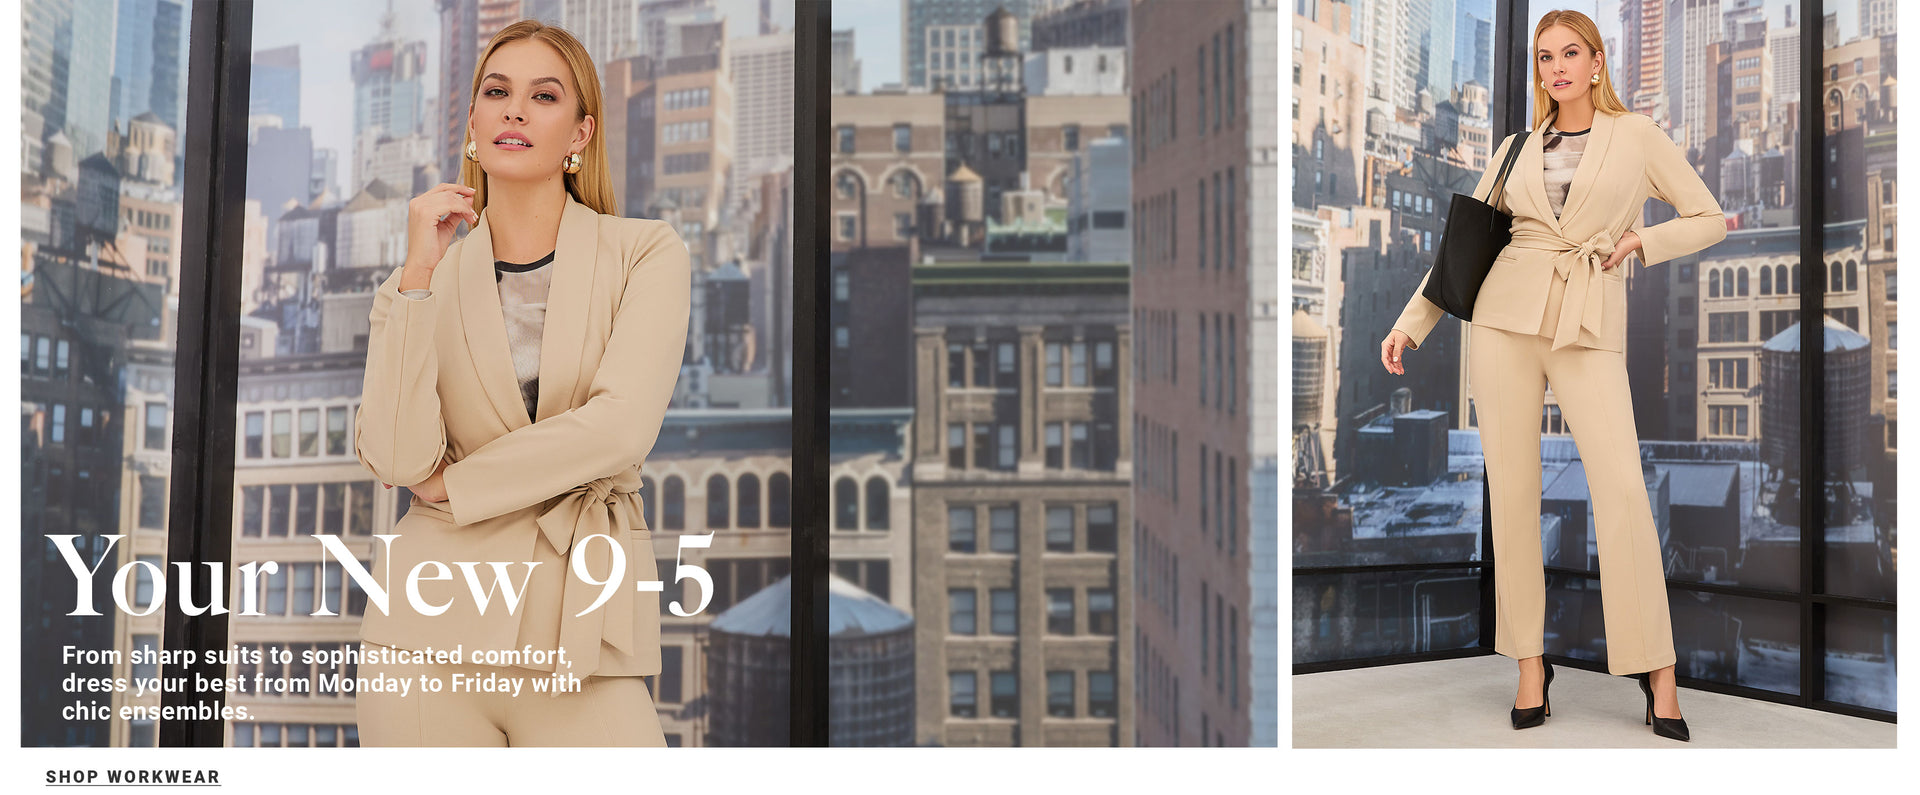 Your new 9 to 5. Shop workwear